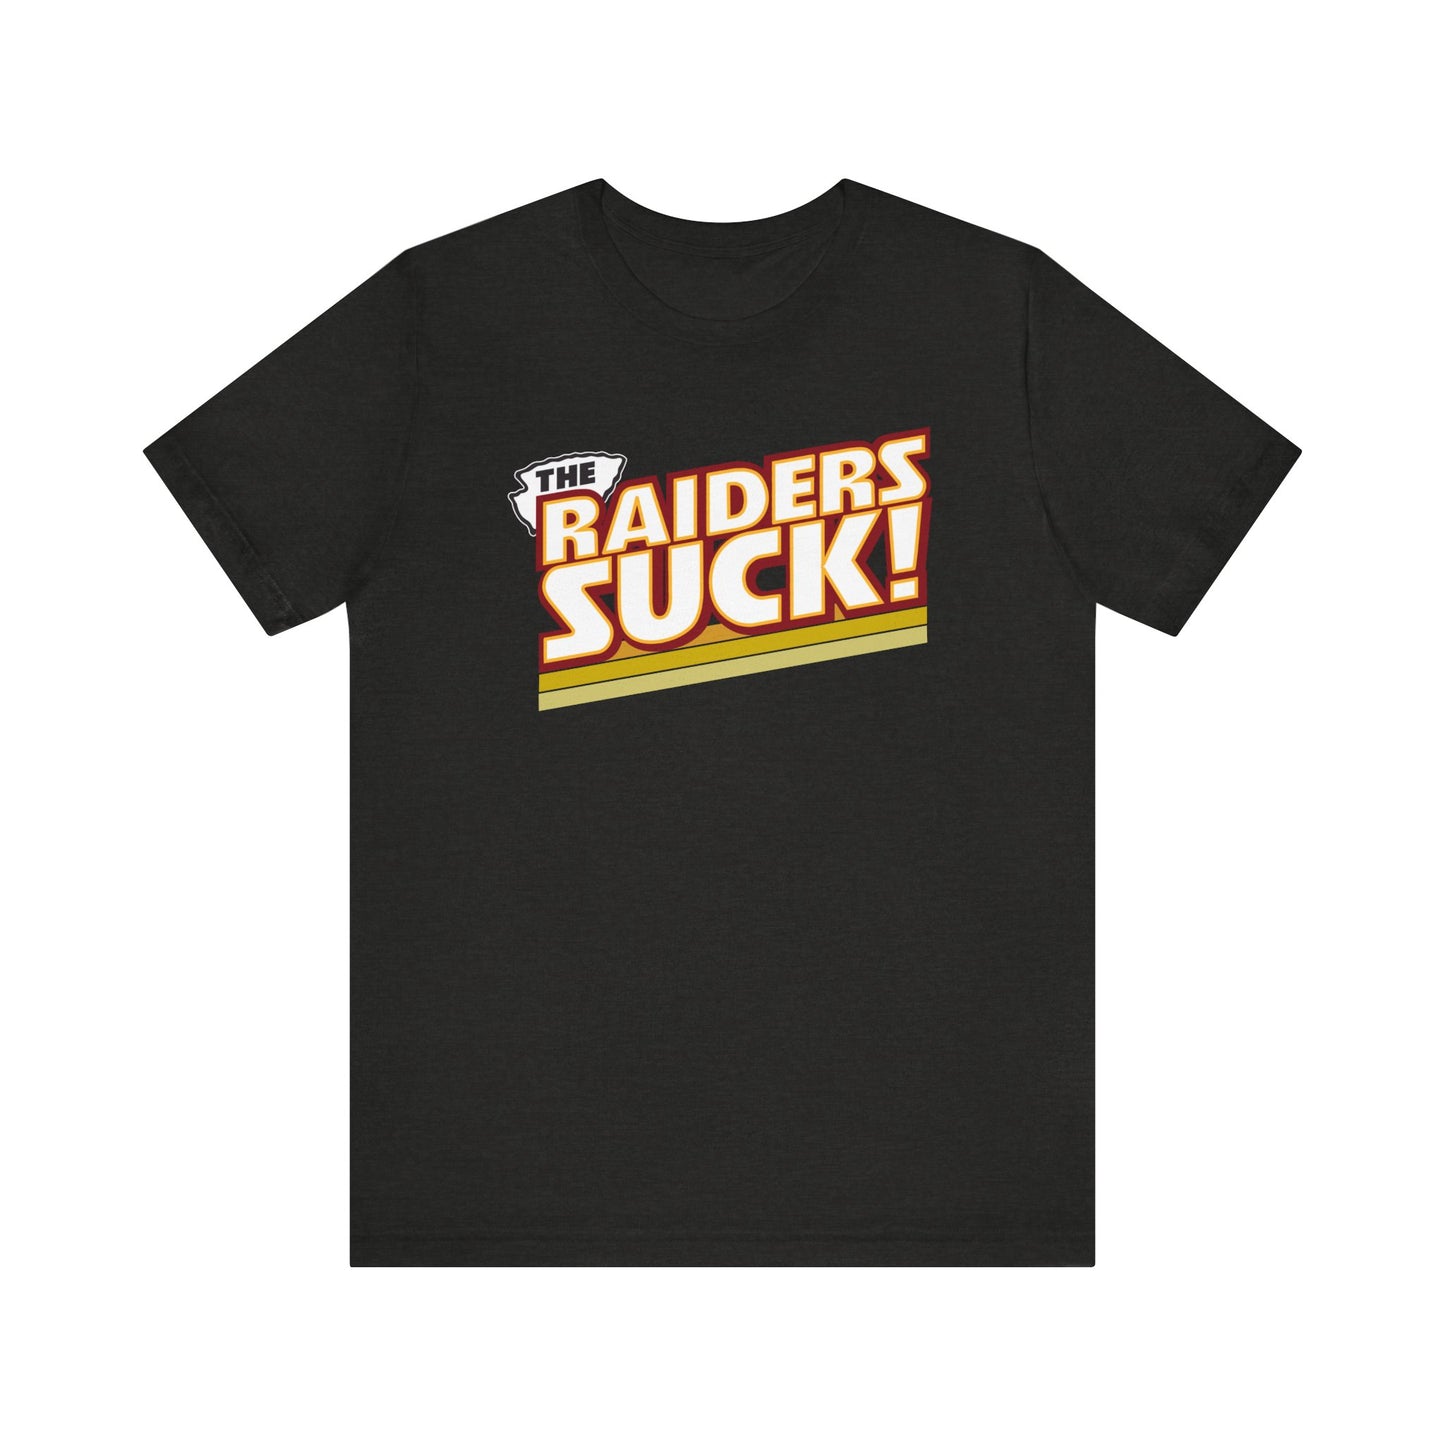 I Hate That Vaygess Team (for KC fans) - Unisex Jersey Short Sleeve Tee